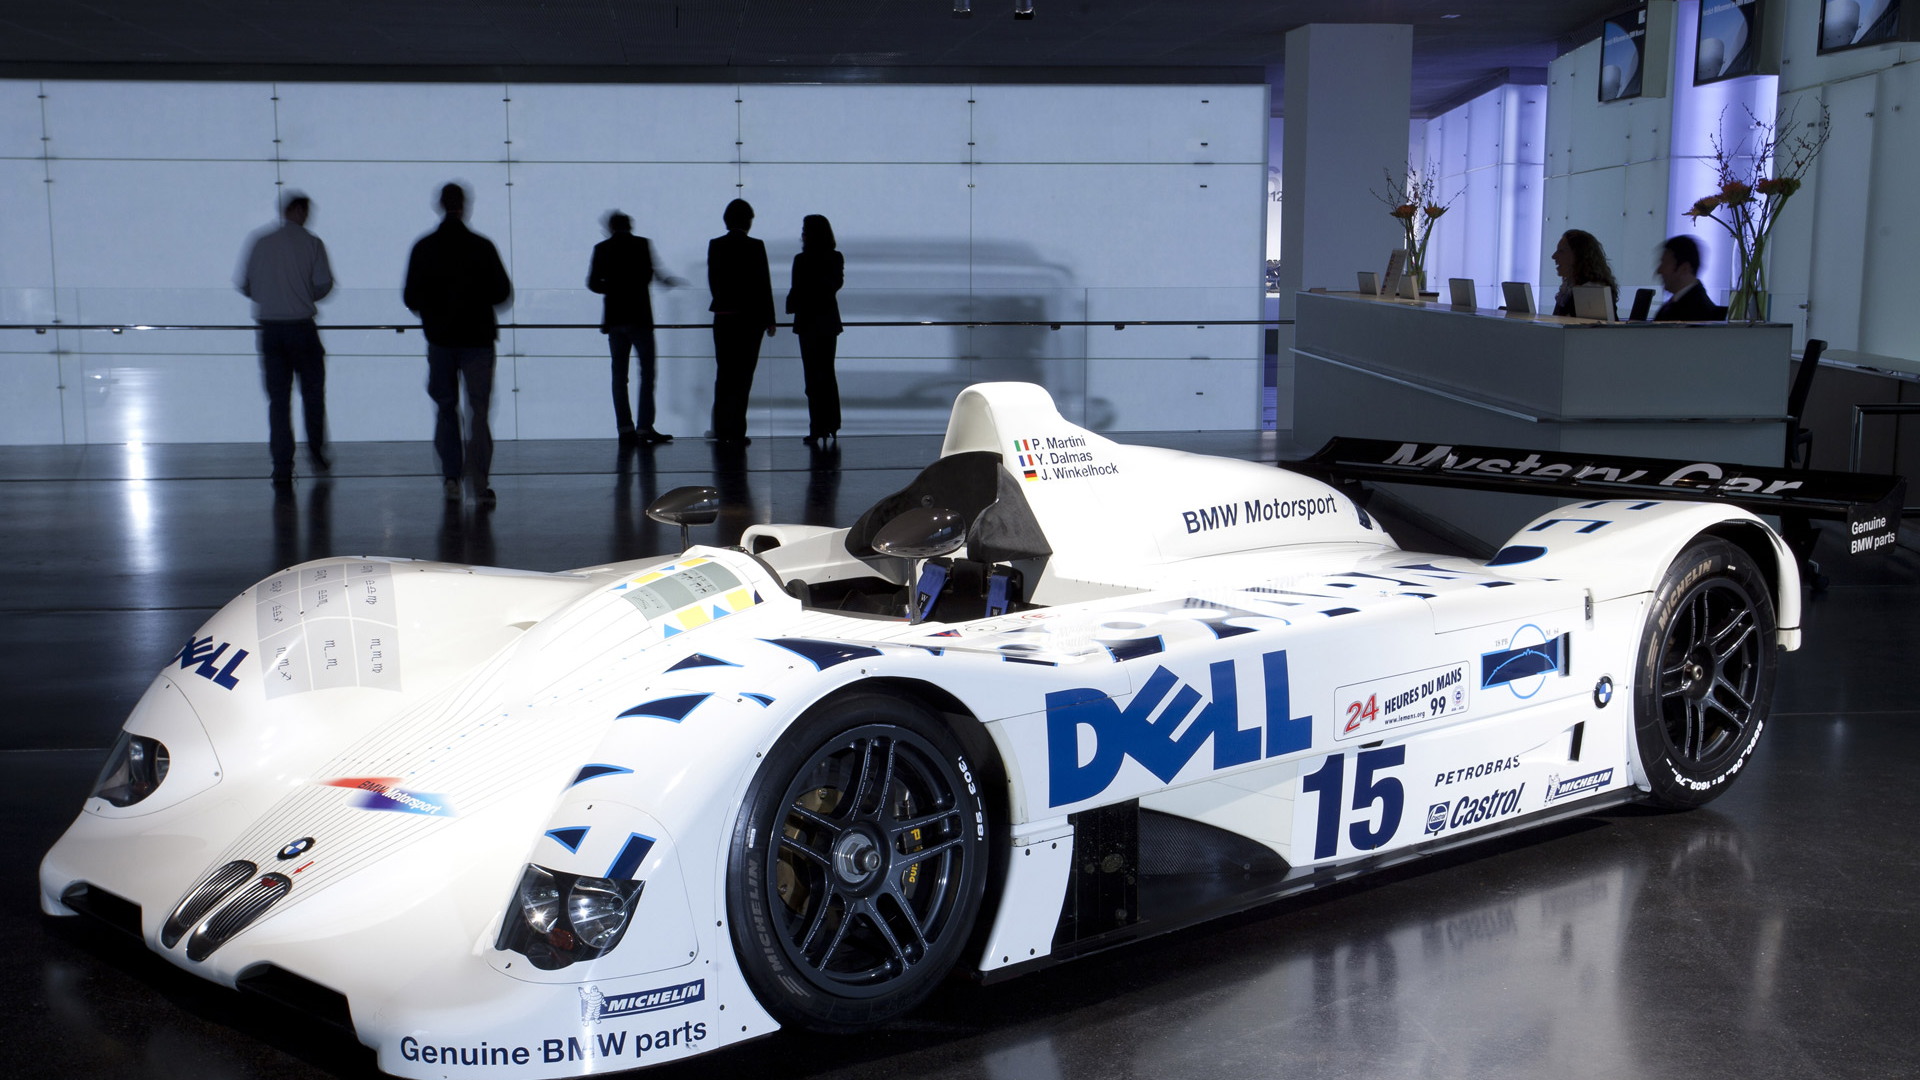 BMW V12 LMR that won overall in the 1999 24 Hours of Le Mans